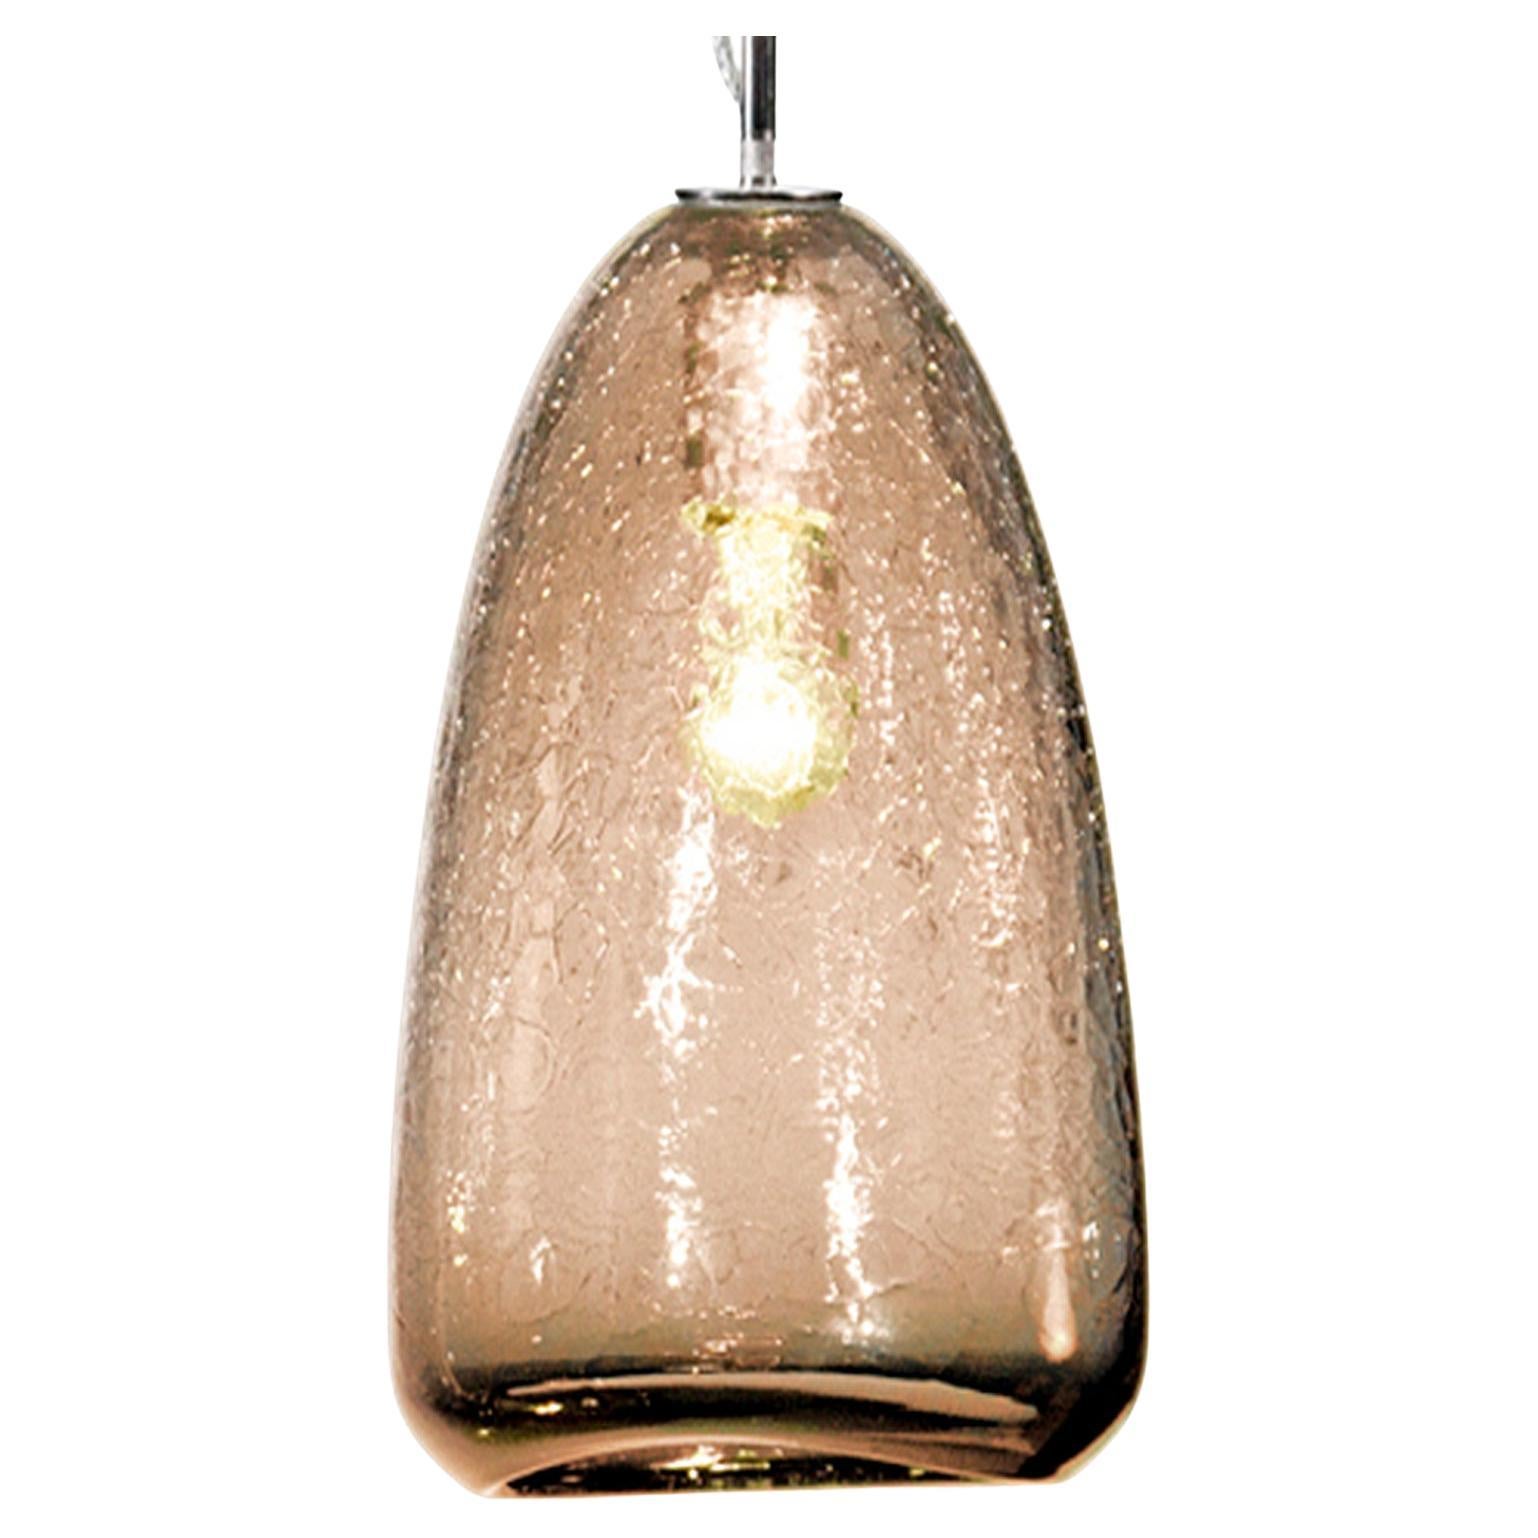 Tea Summit Pendant from the Boa Lighting Collection